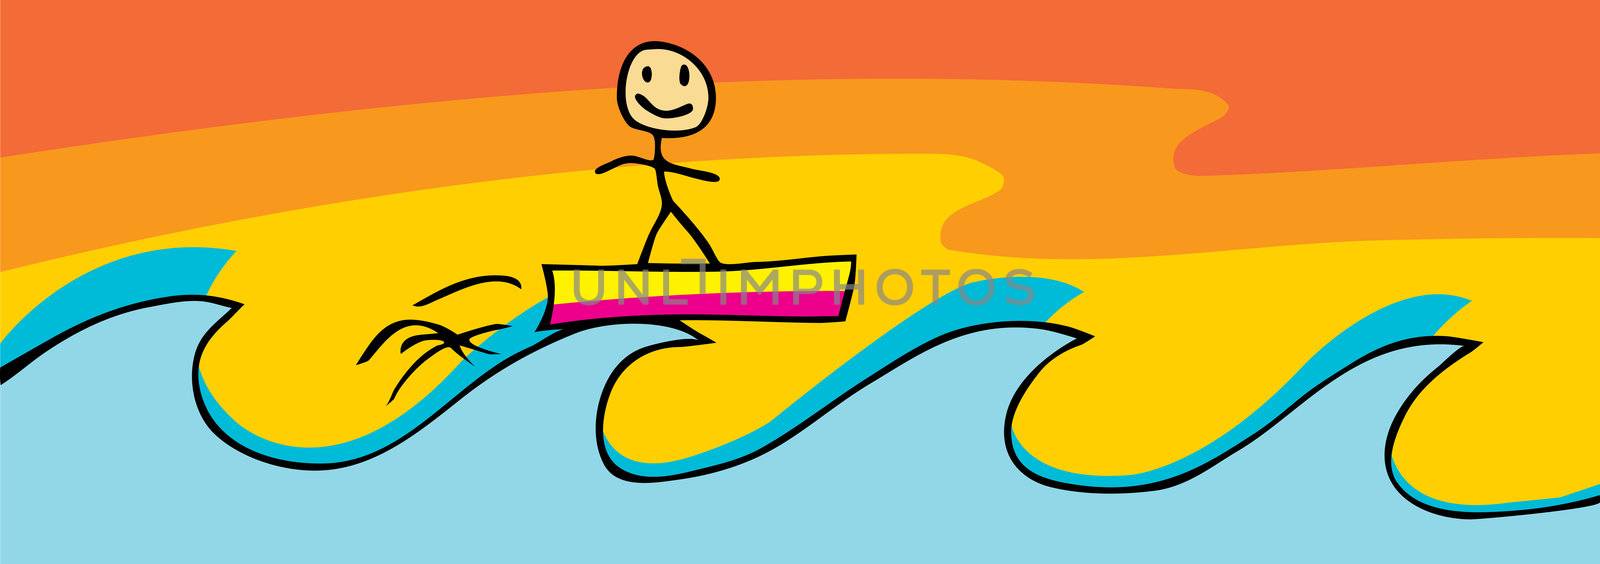 Surfing Stick Figure by TheBlackRhino